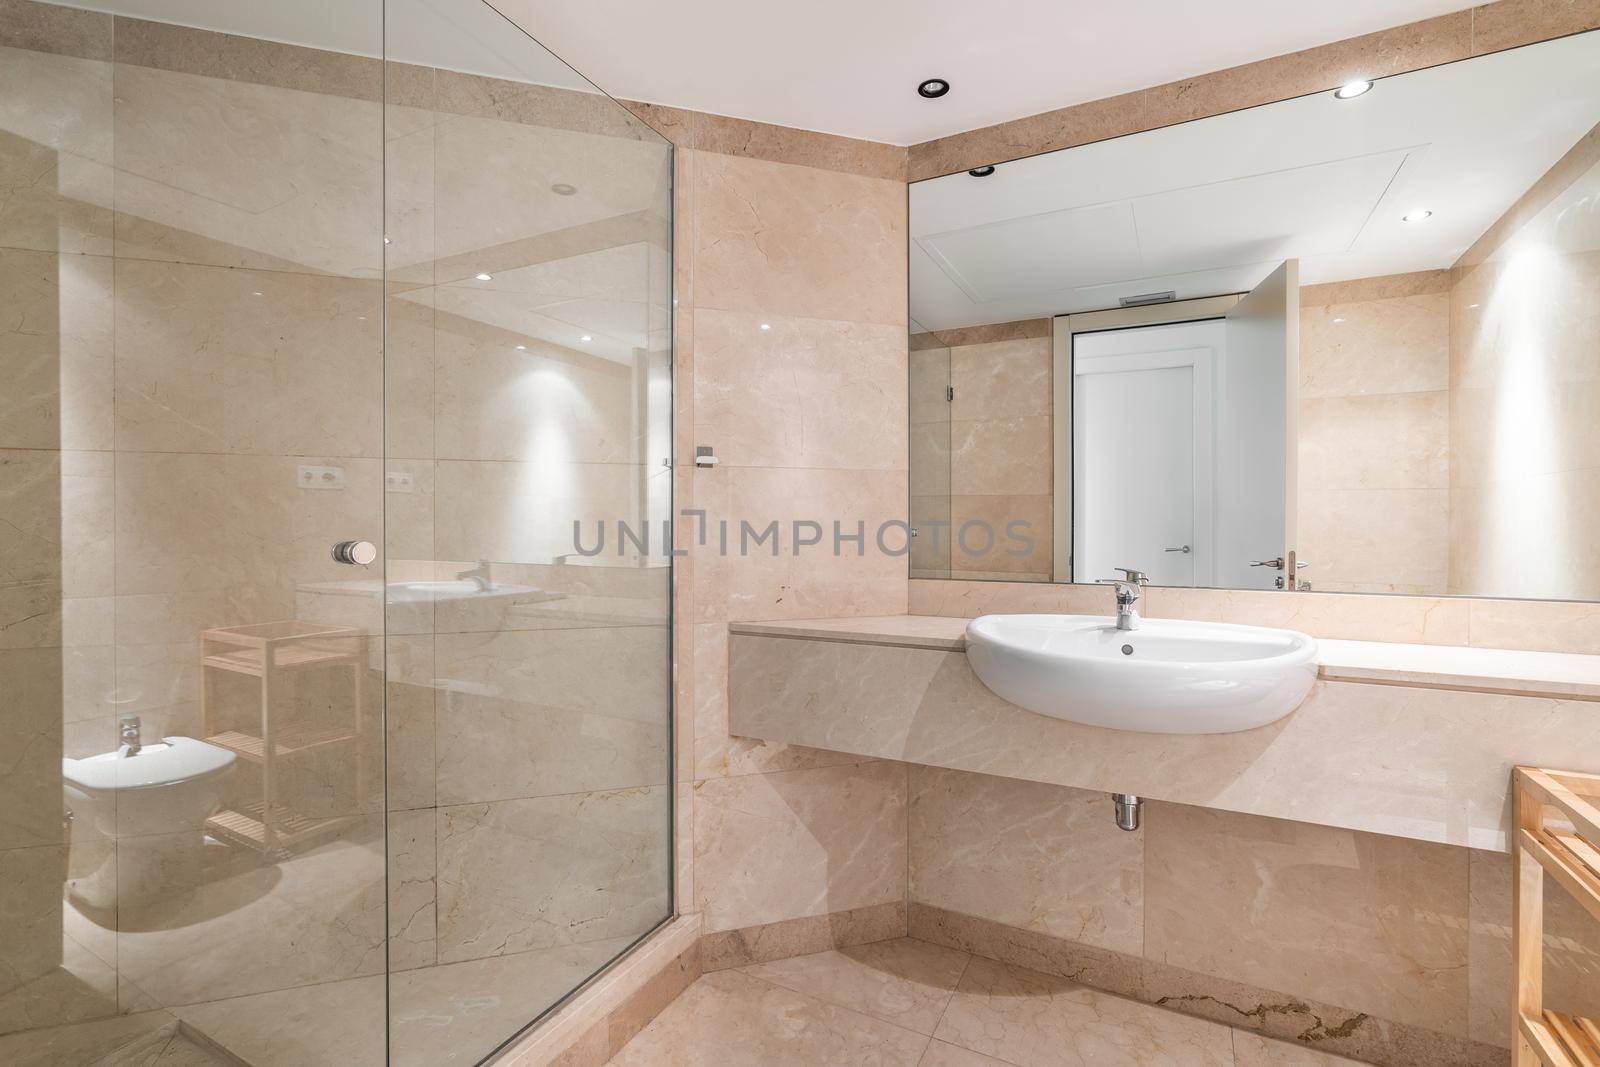 Interior of a peach bathroom in classic design, with shower zone, marble finishing and large mirror.